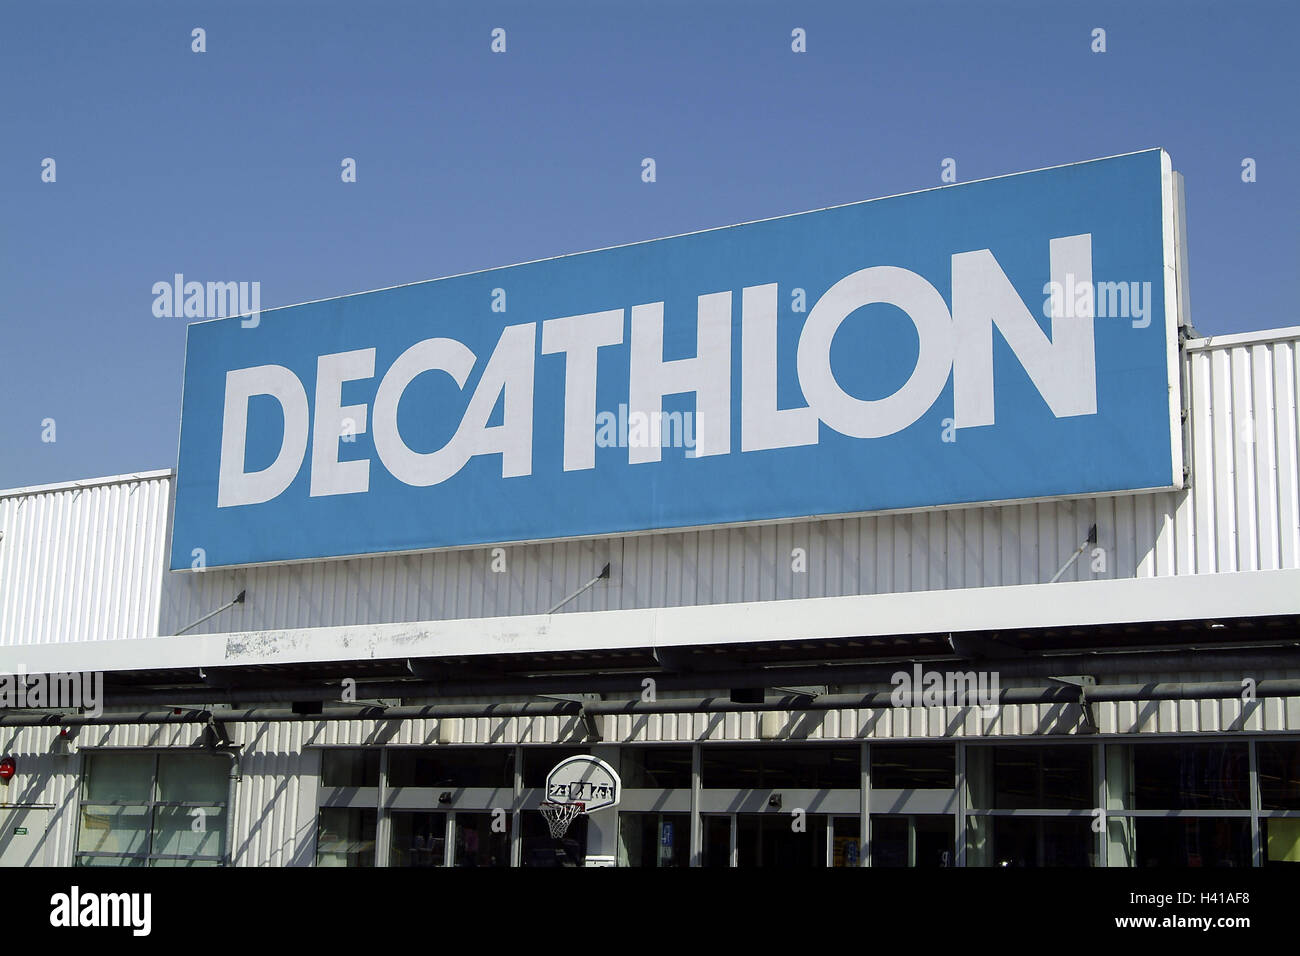 Decathlon Company Sign High Resolution Stock Photography and Images - Alamy